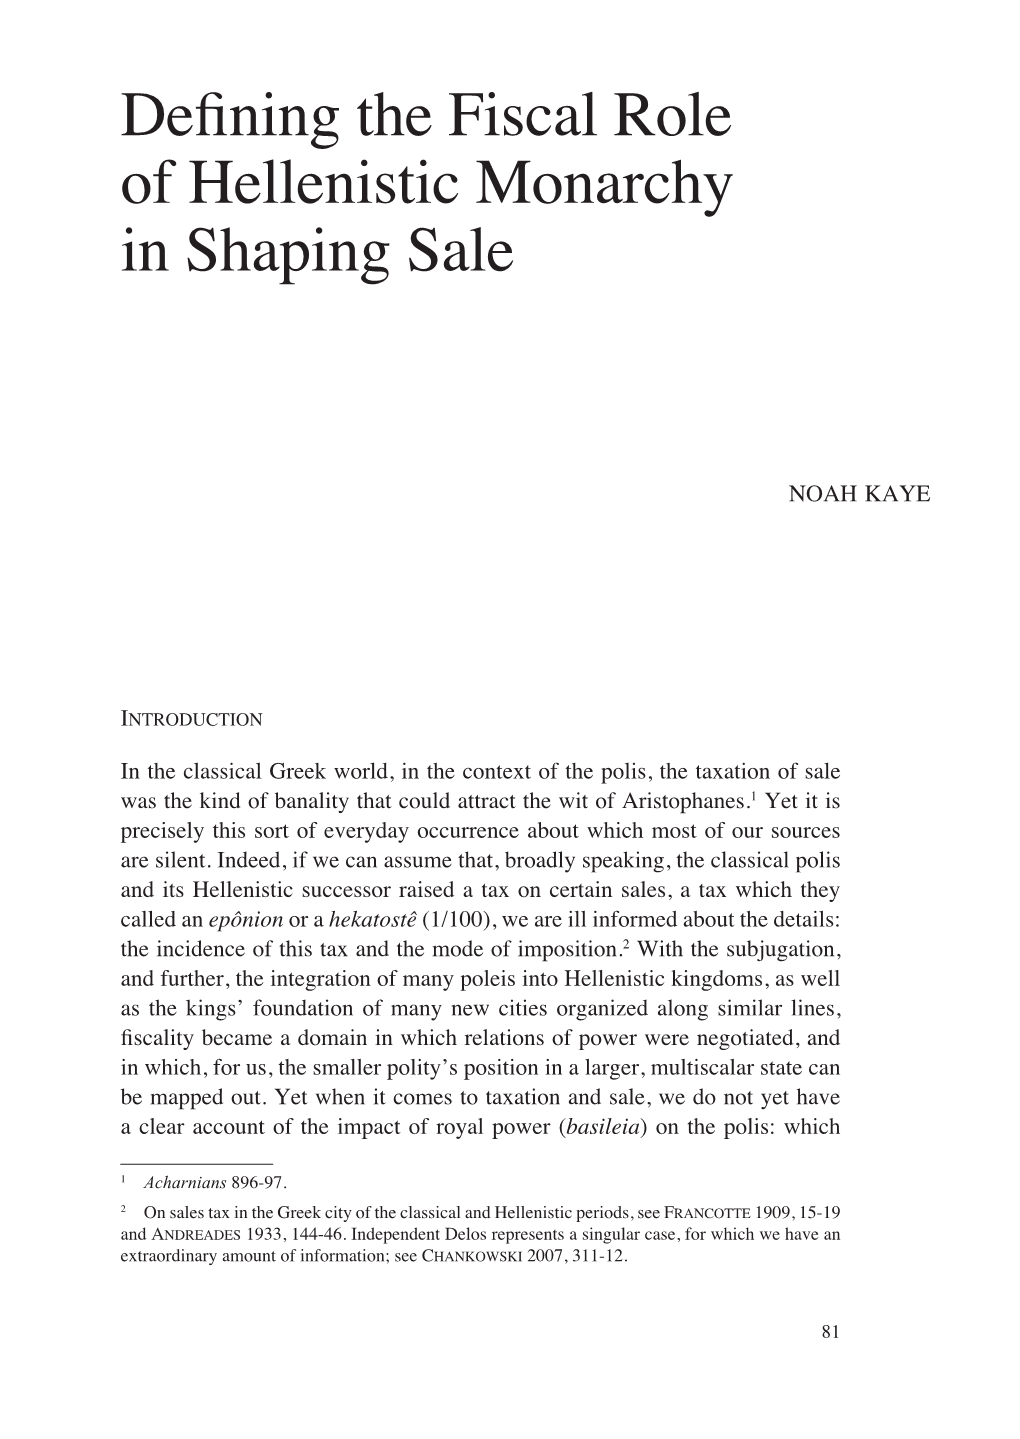 Defining the Fiscal Role of Hellenistic Monarchy in Shaping Sale